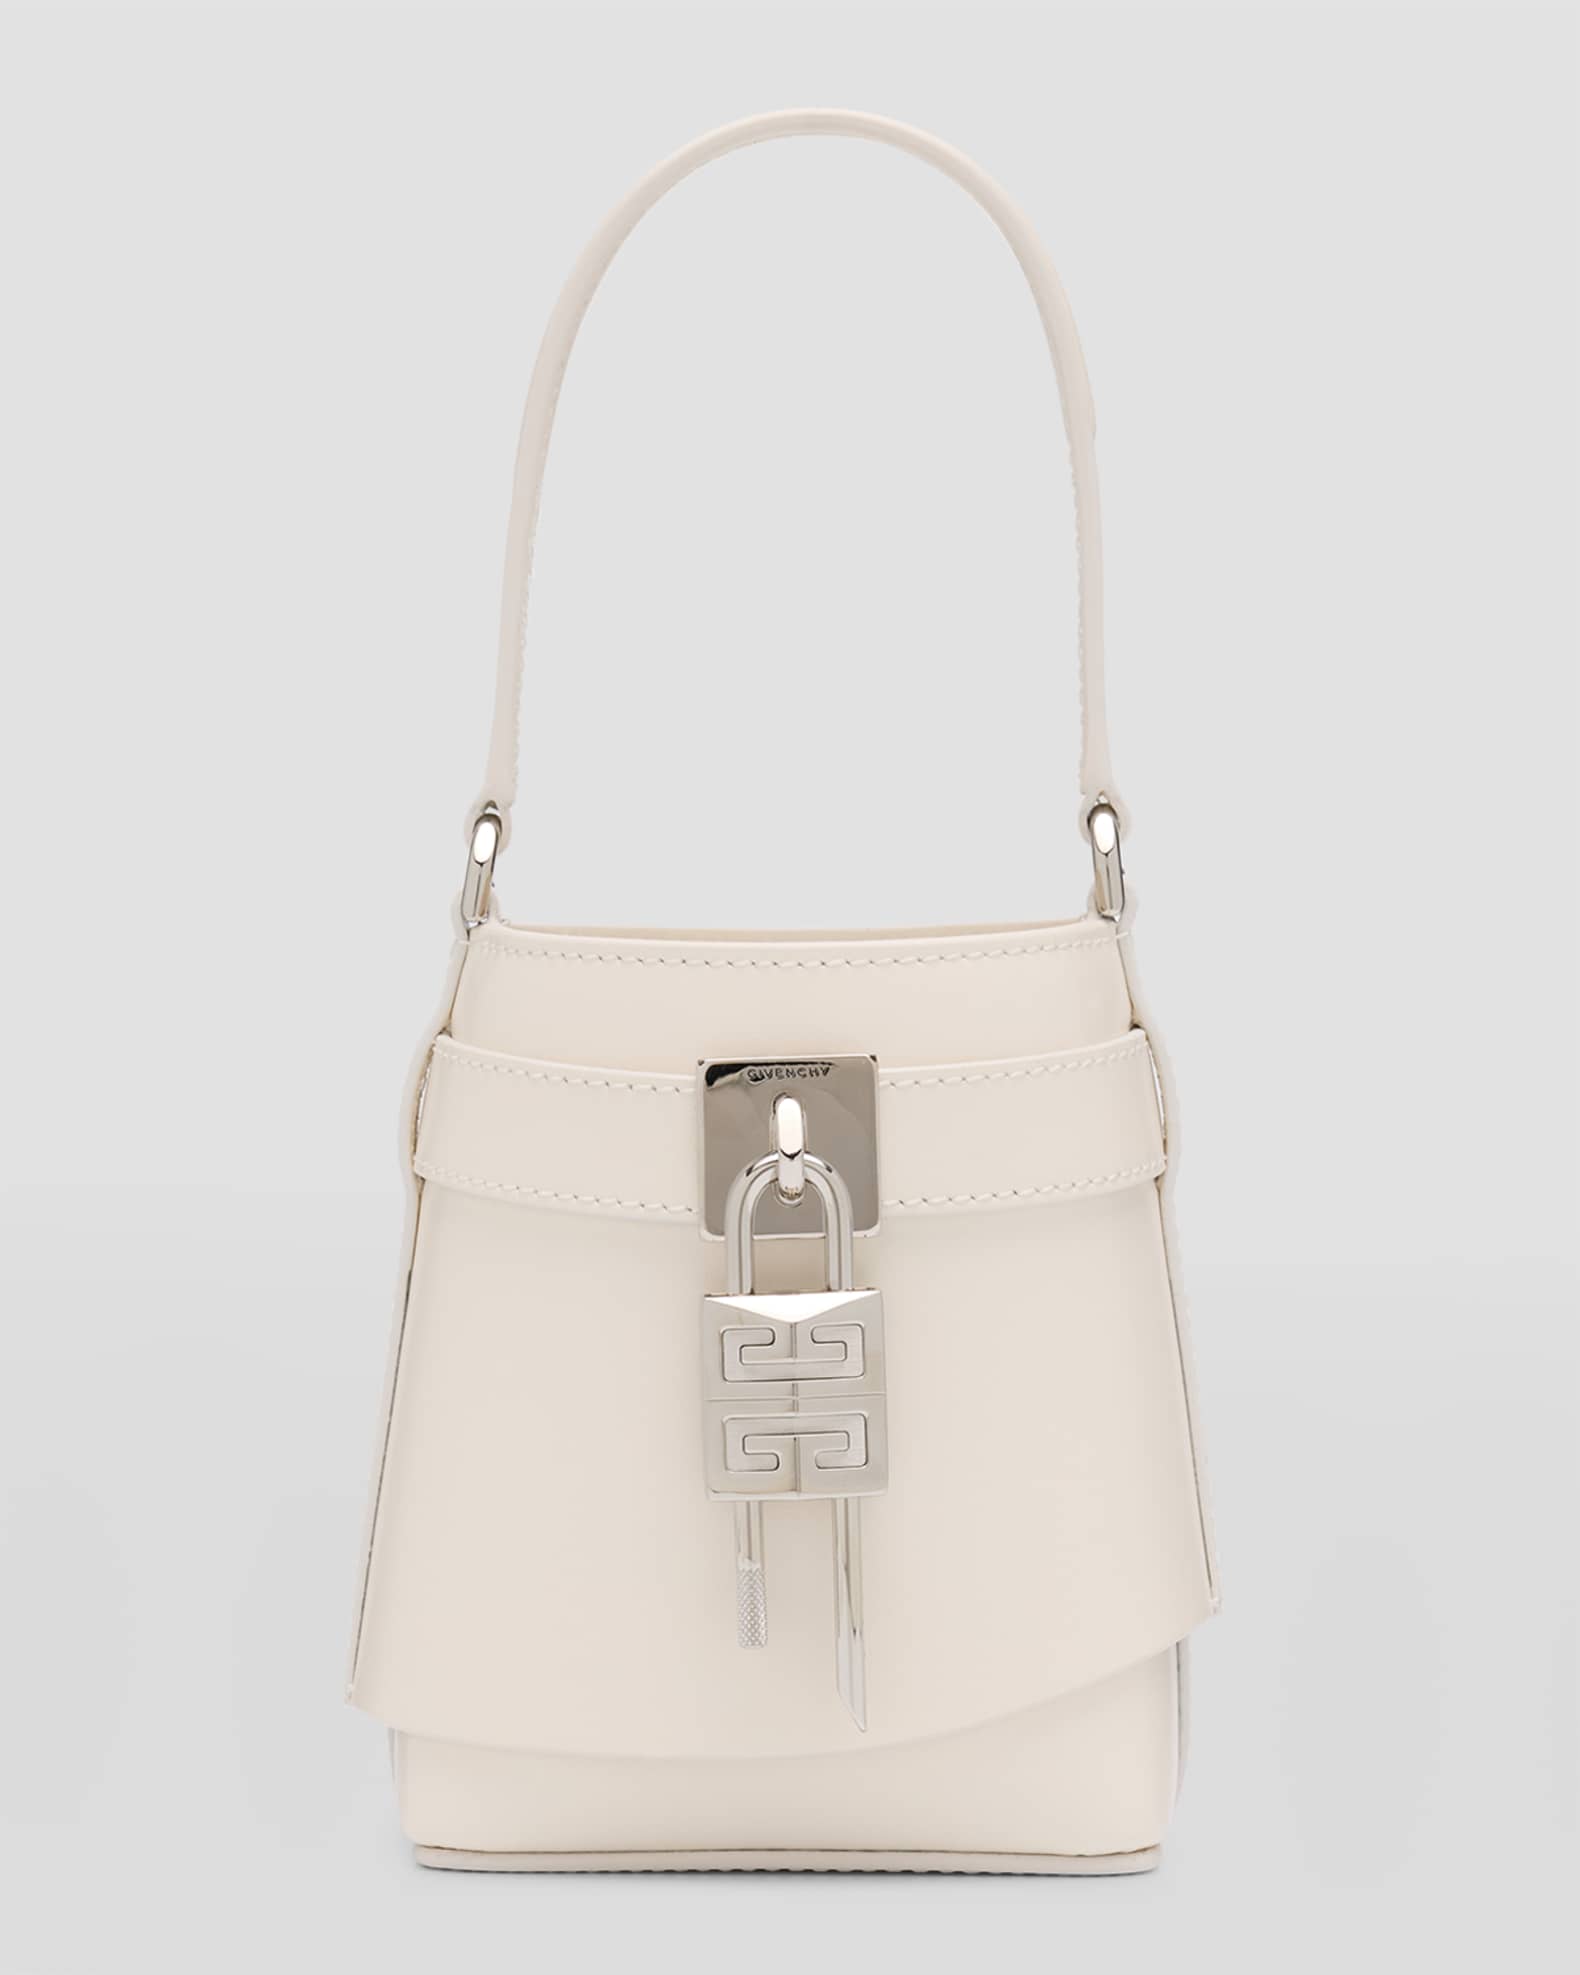 Givenchy Shark Lock Micro Bucket Bag in Box Leather | Neiman Marcus